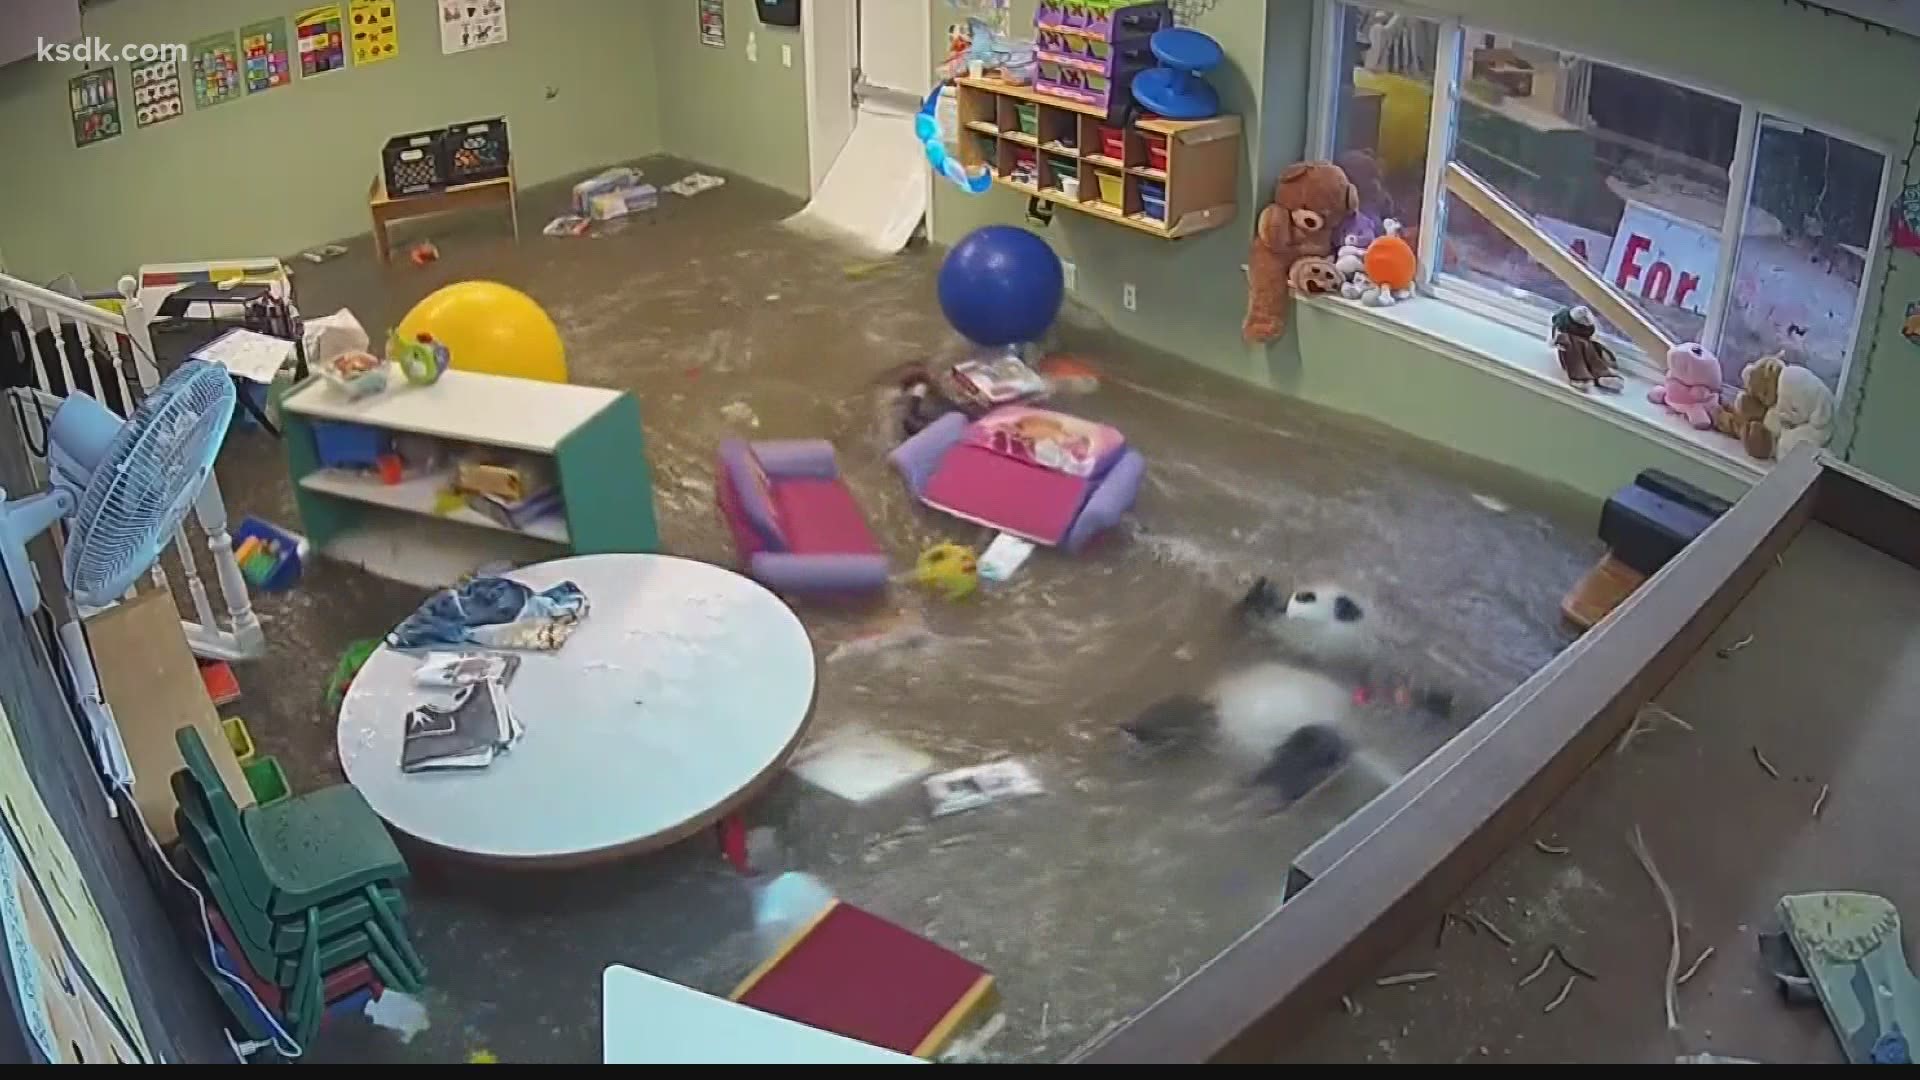 Future Stars Academy is mopping up after a flood destroyed a playroom. Teachers will be out of work and parents are looking for childcare options.